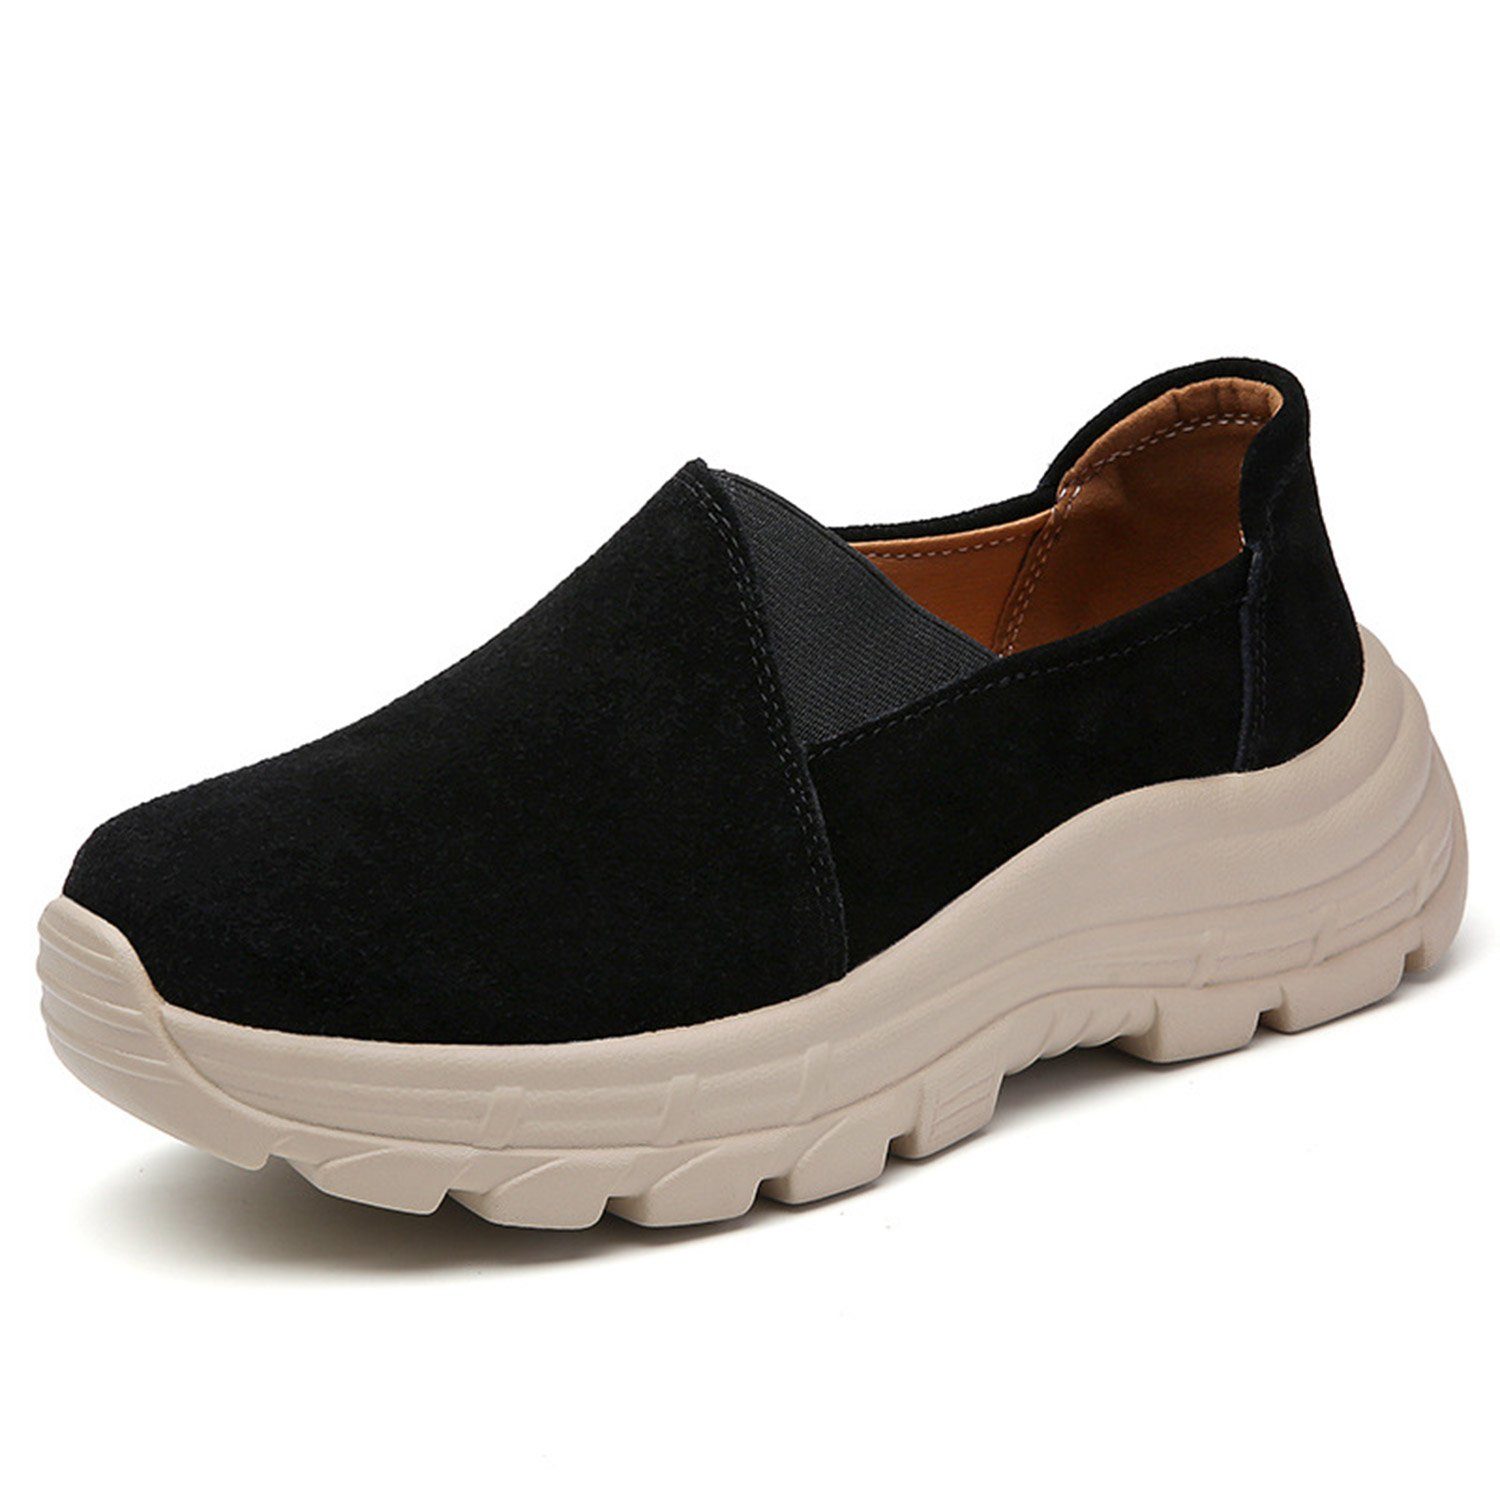 Sneakers Turnschuhe Bequeme Daisred mit Schwarz Plateausohle Loafer